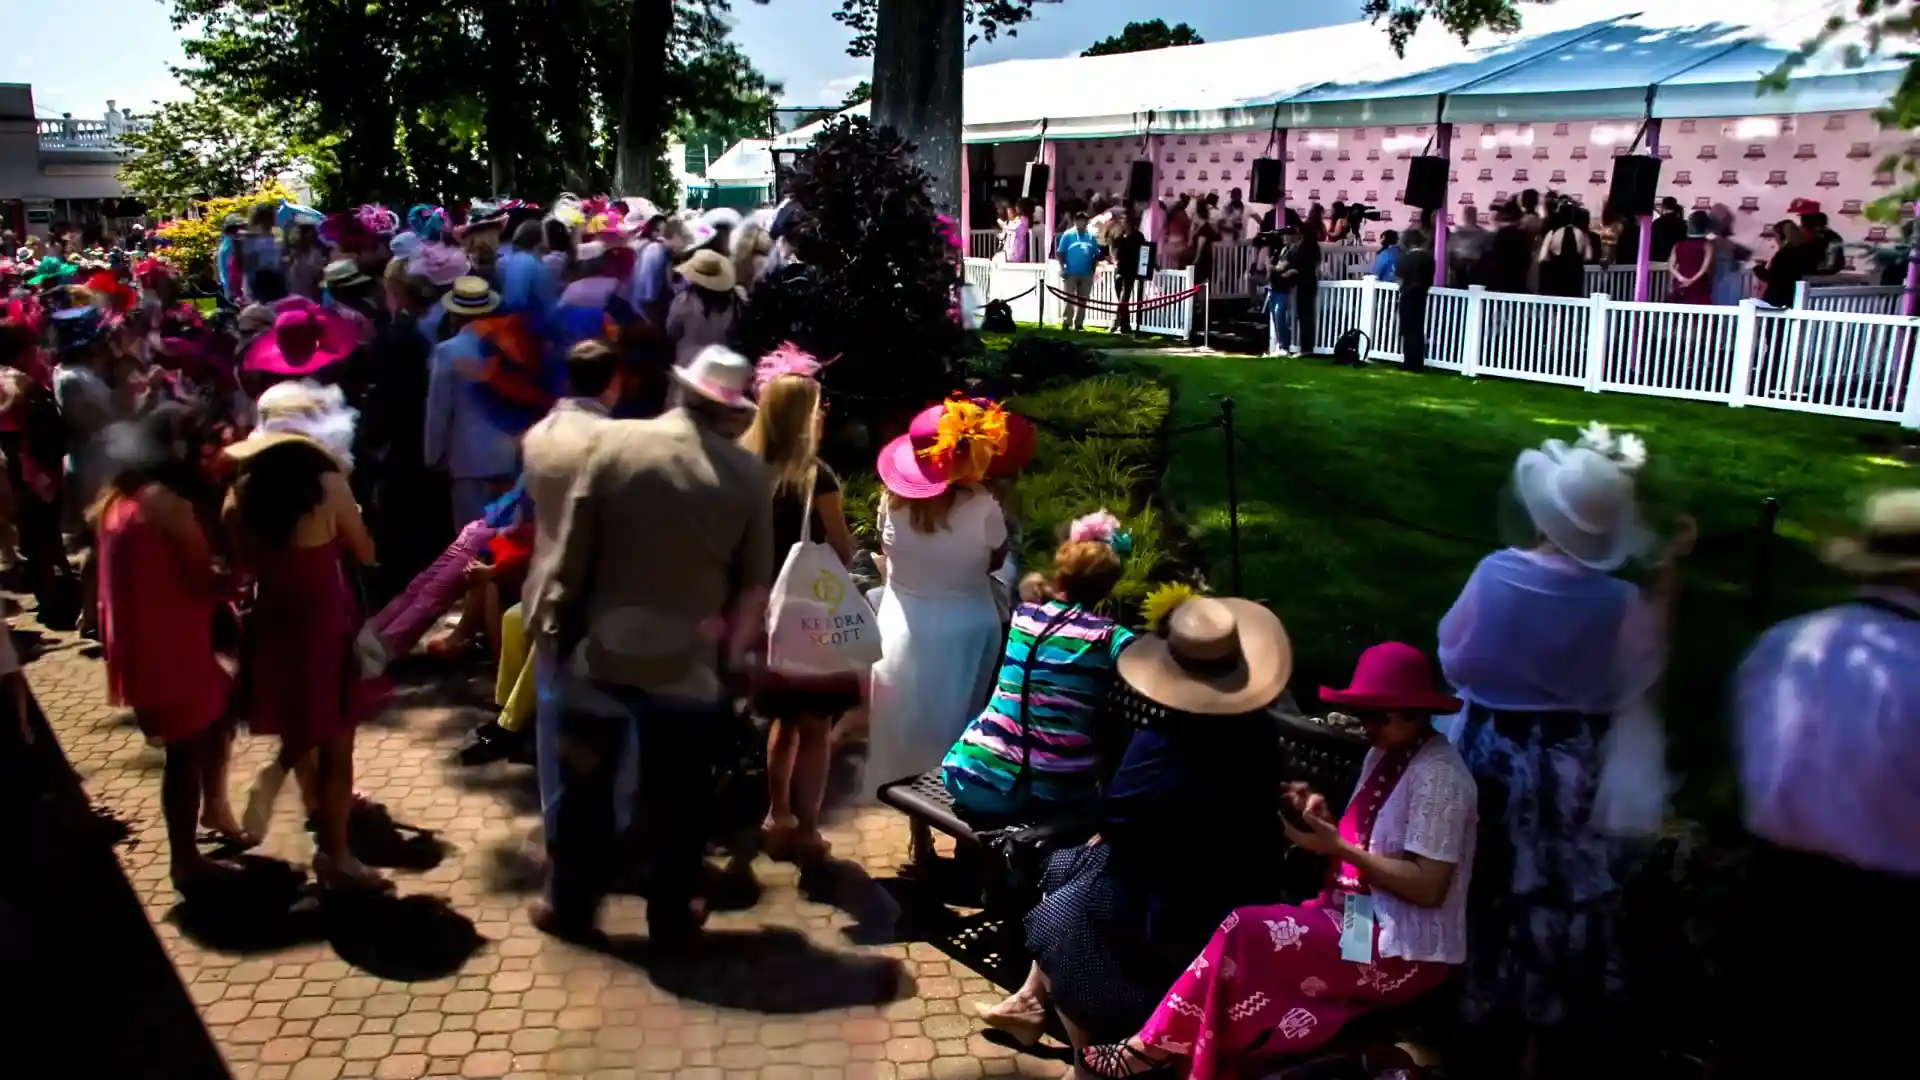 Crowds At Kentucky Derby